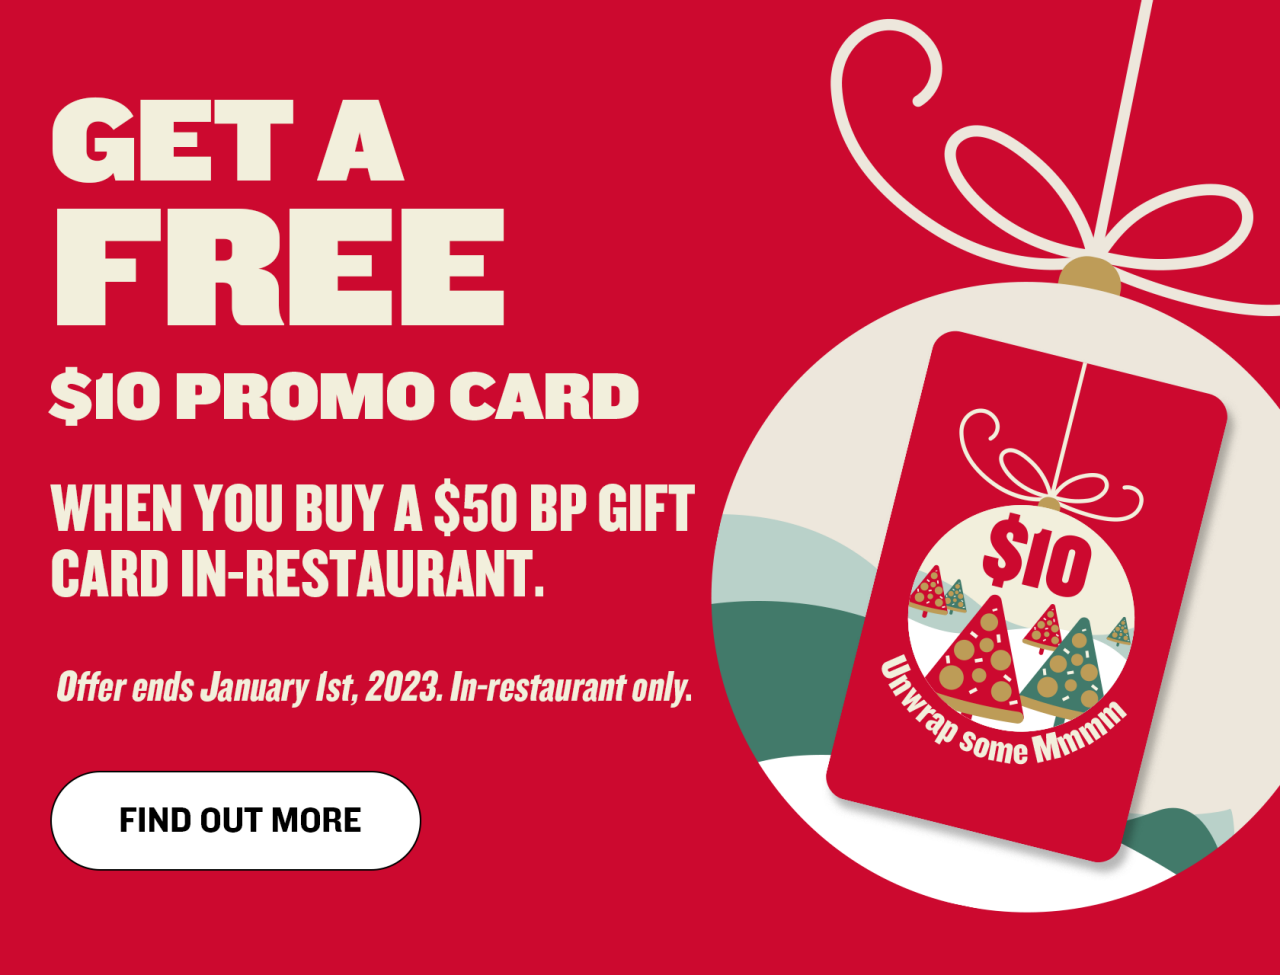 Get a free $10 promo card when you buy a $50 BP gift card in-restaurant.